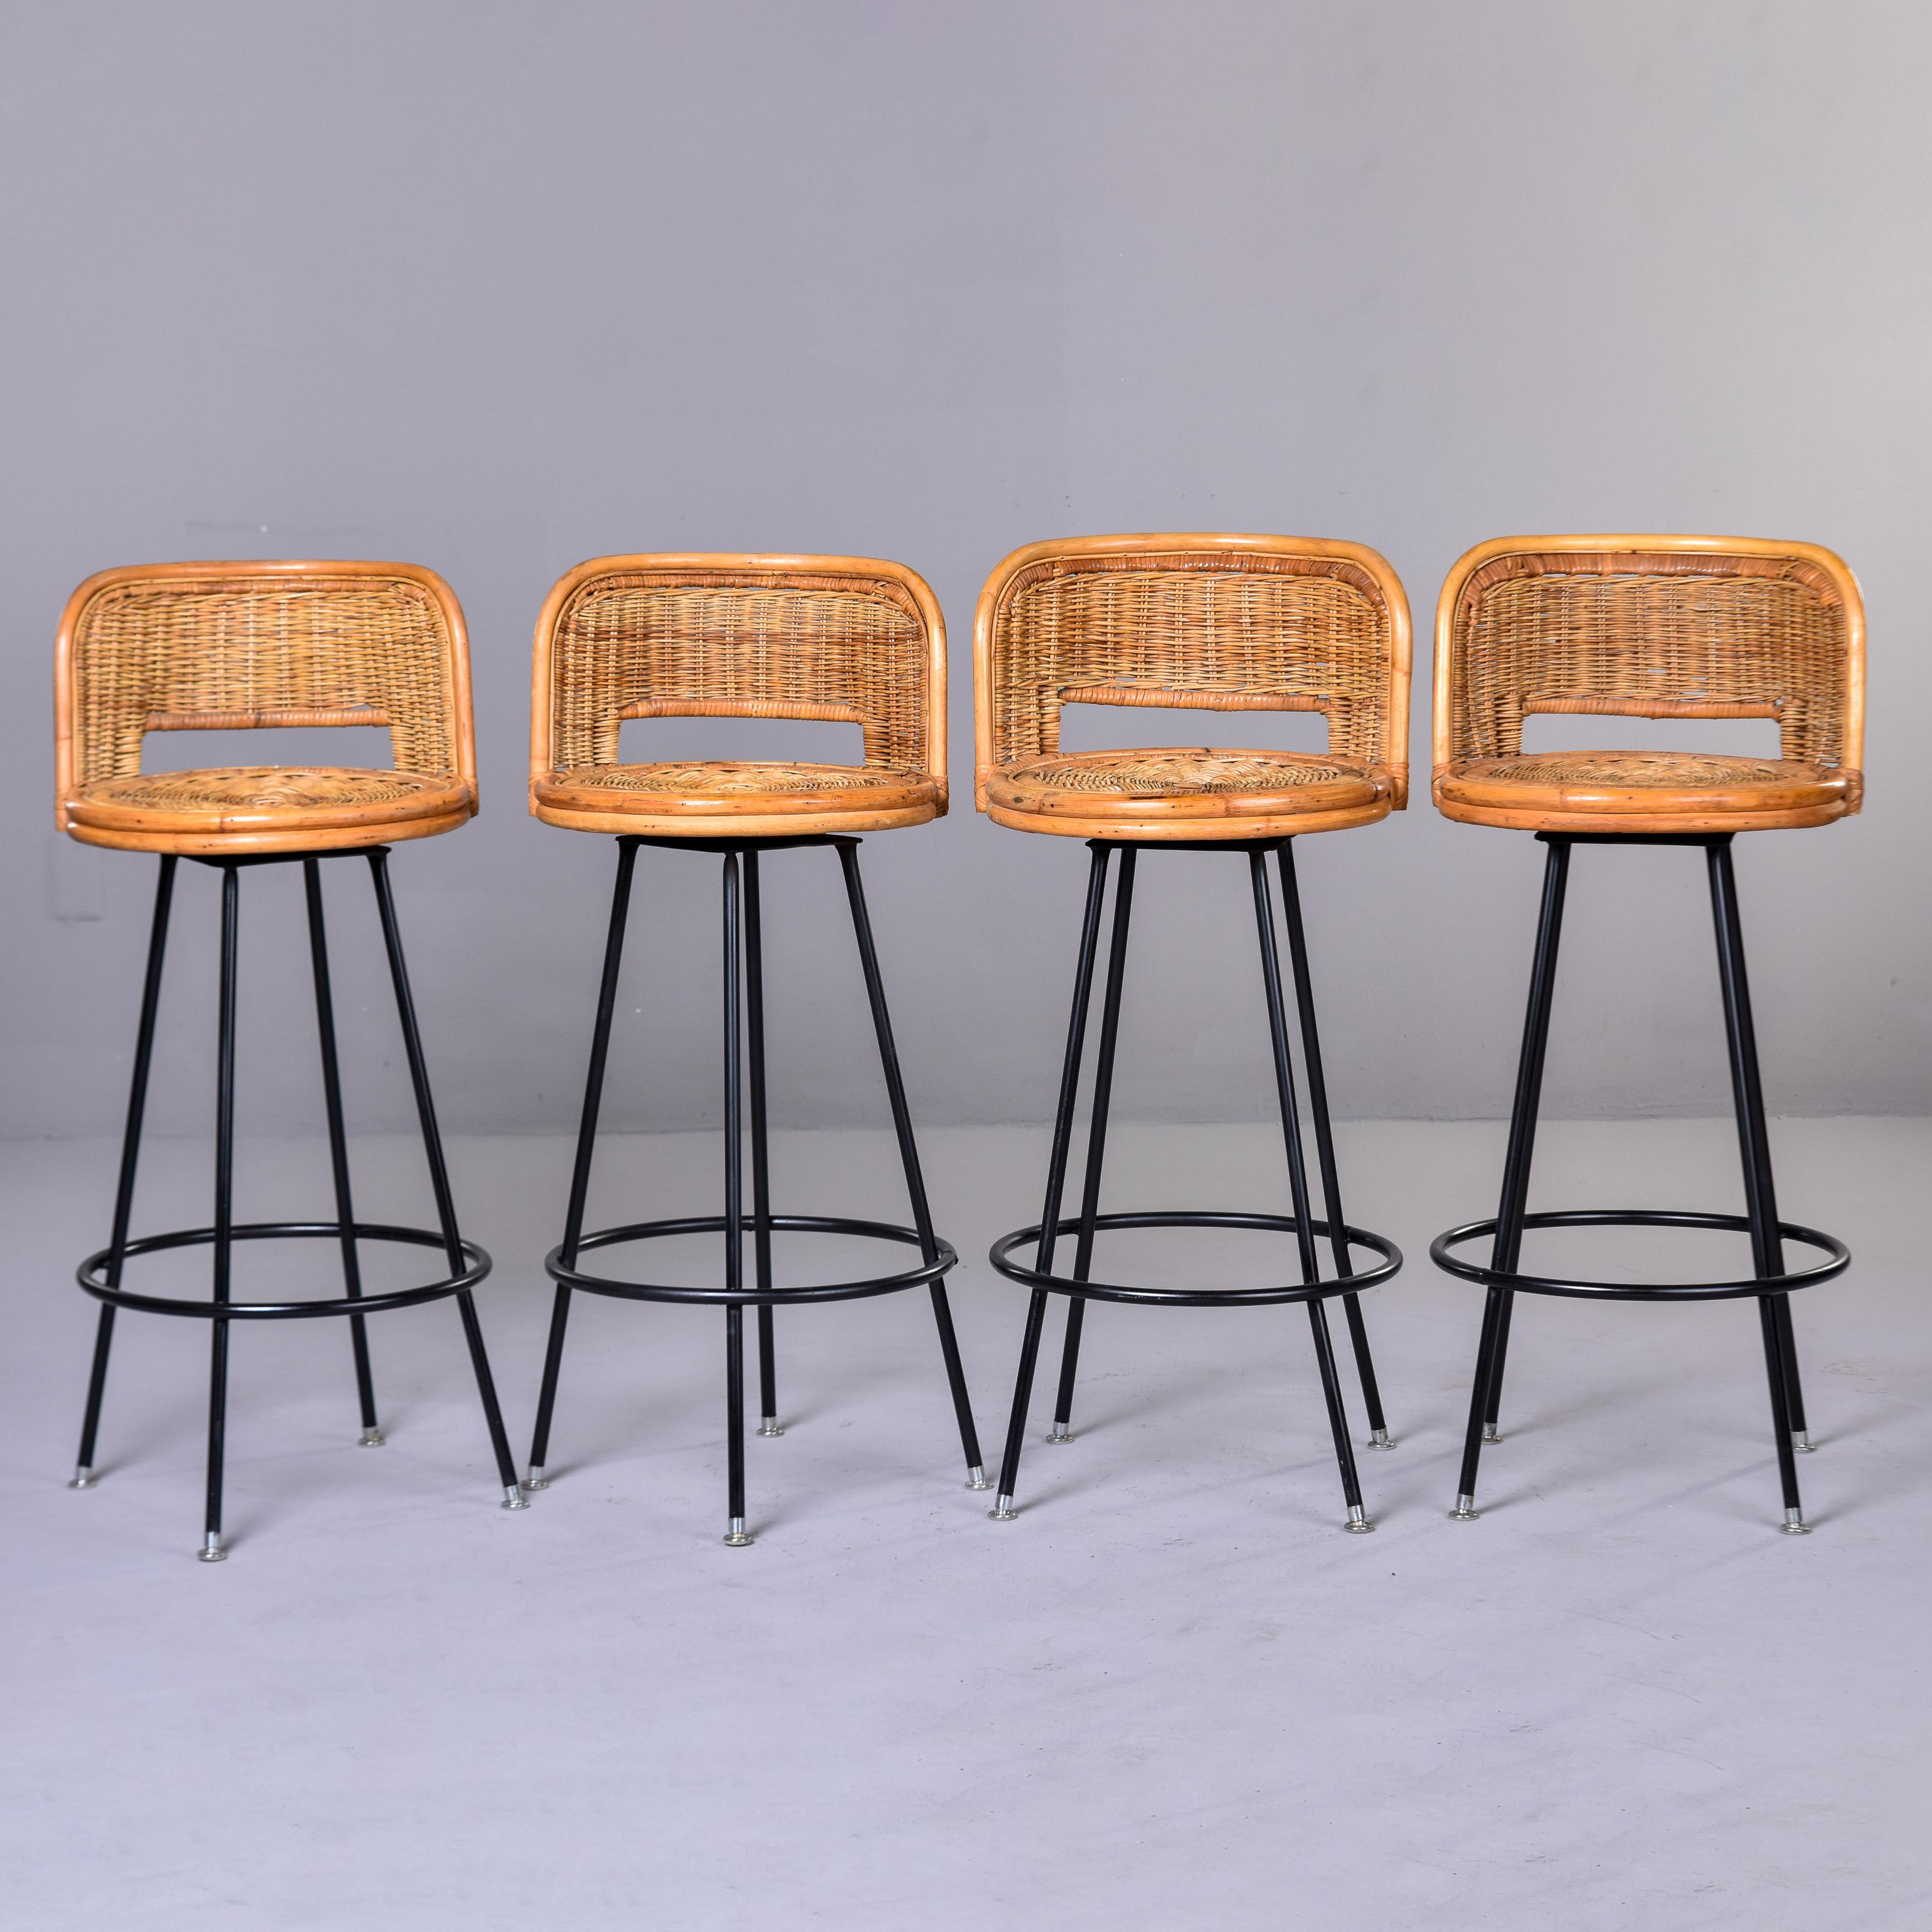 Found in the U.S., this set of four woven wicker swivel bar height stools date from the early 1960s. Stools have a black finished metal base with silver tone metal foot caps, round seats, and low back rests in the style of Danny Ho Fong. Very good